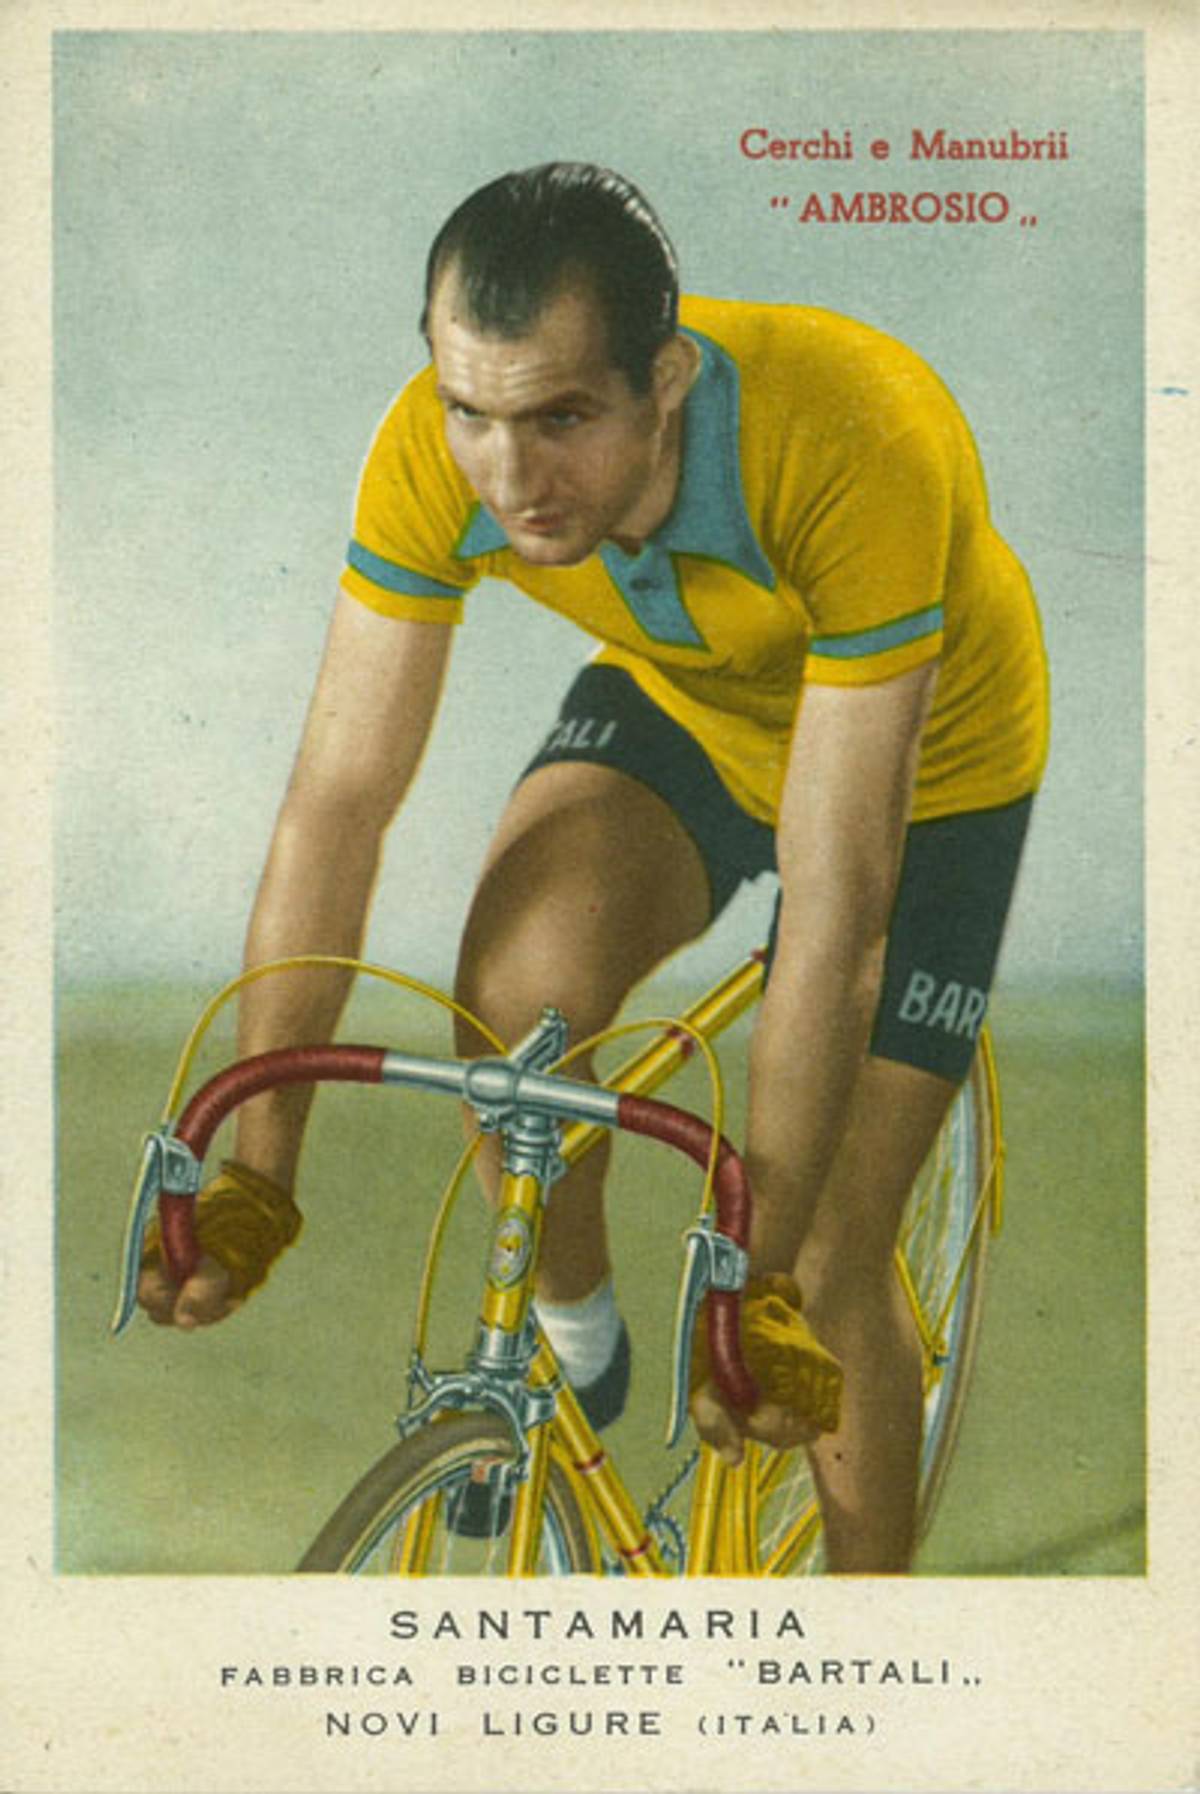 Gino Bartali bicycle promotional postcard, 1950-55. (Image courtesy Michael Haddad, Guest Curator, Italian American Museum)